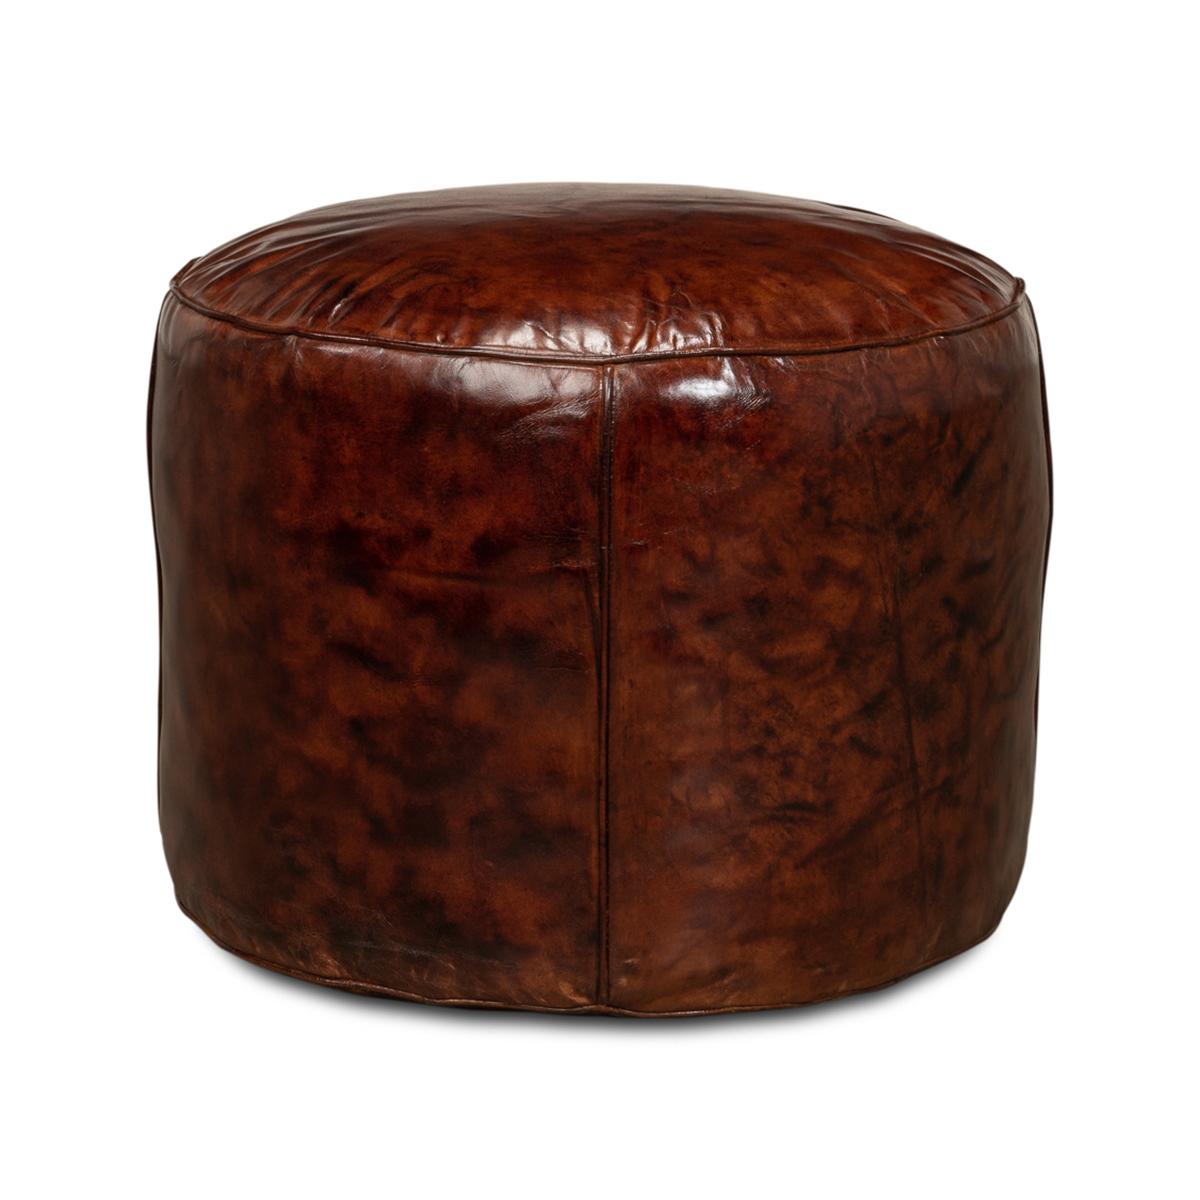 In an antique brown leather, the round stool is an ideal stool to set aside the bed, a chair, or sofa.

Dimensions: 22